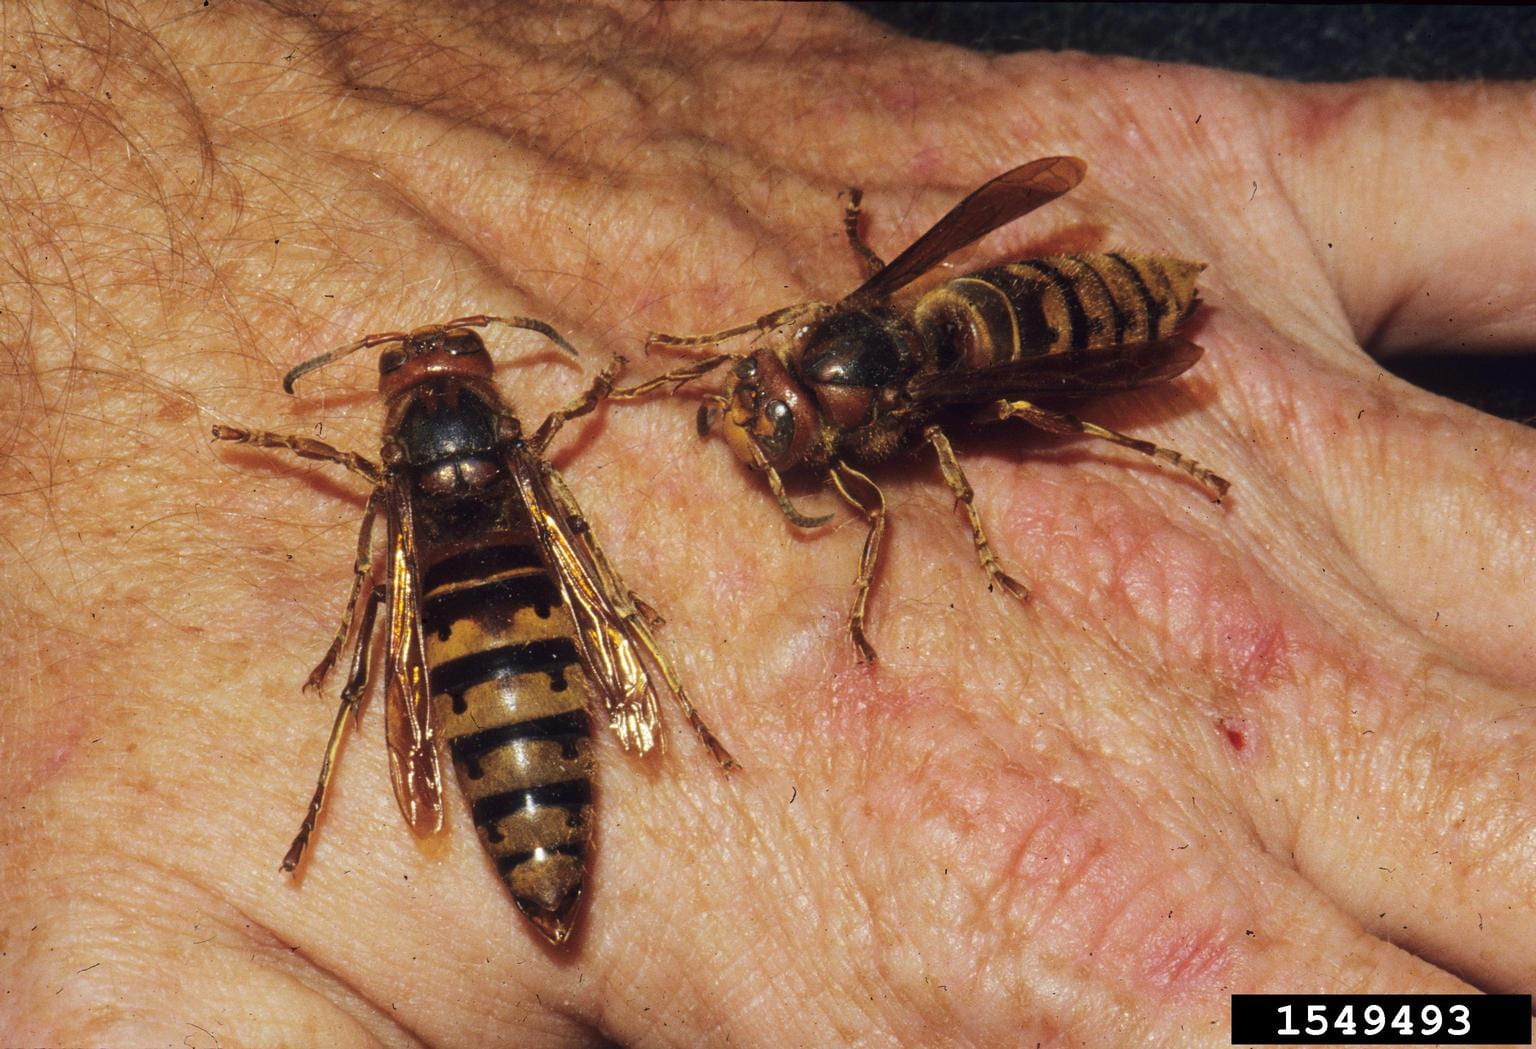 Photo shows two European hornet adults